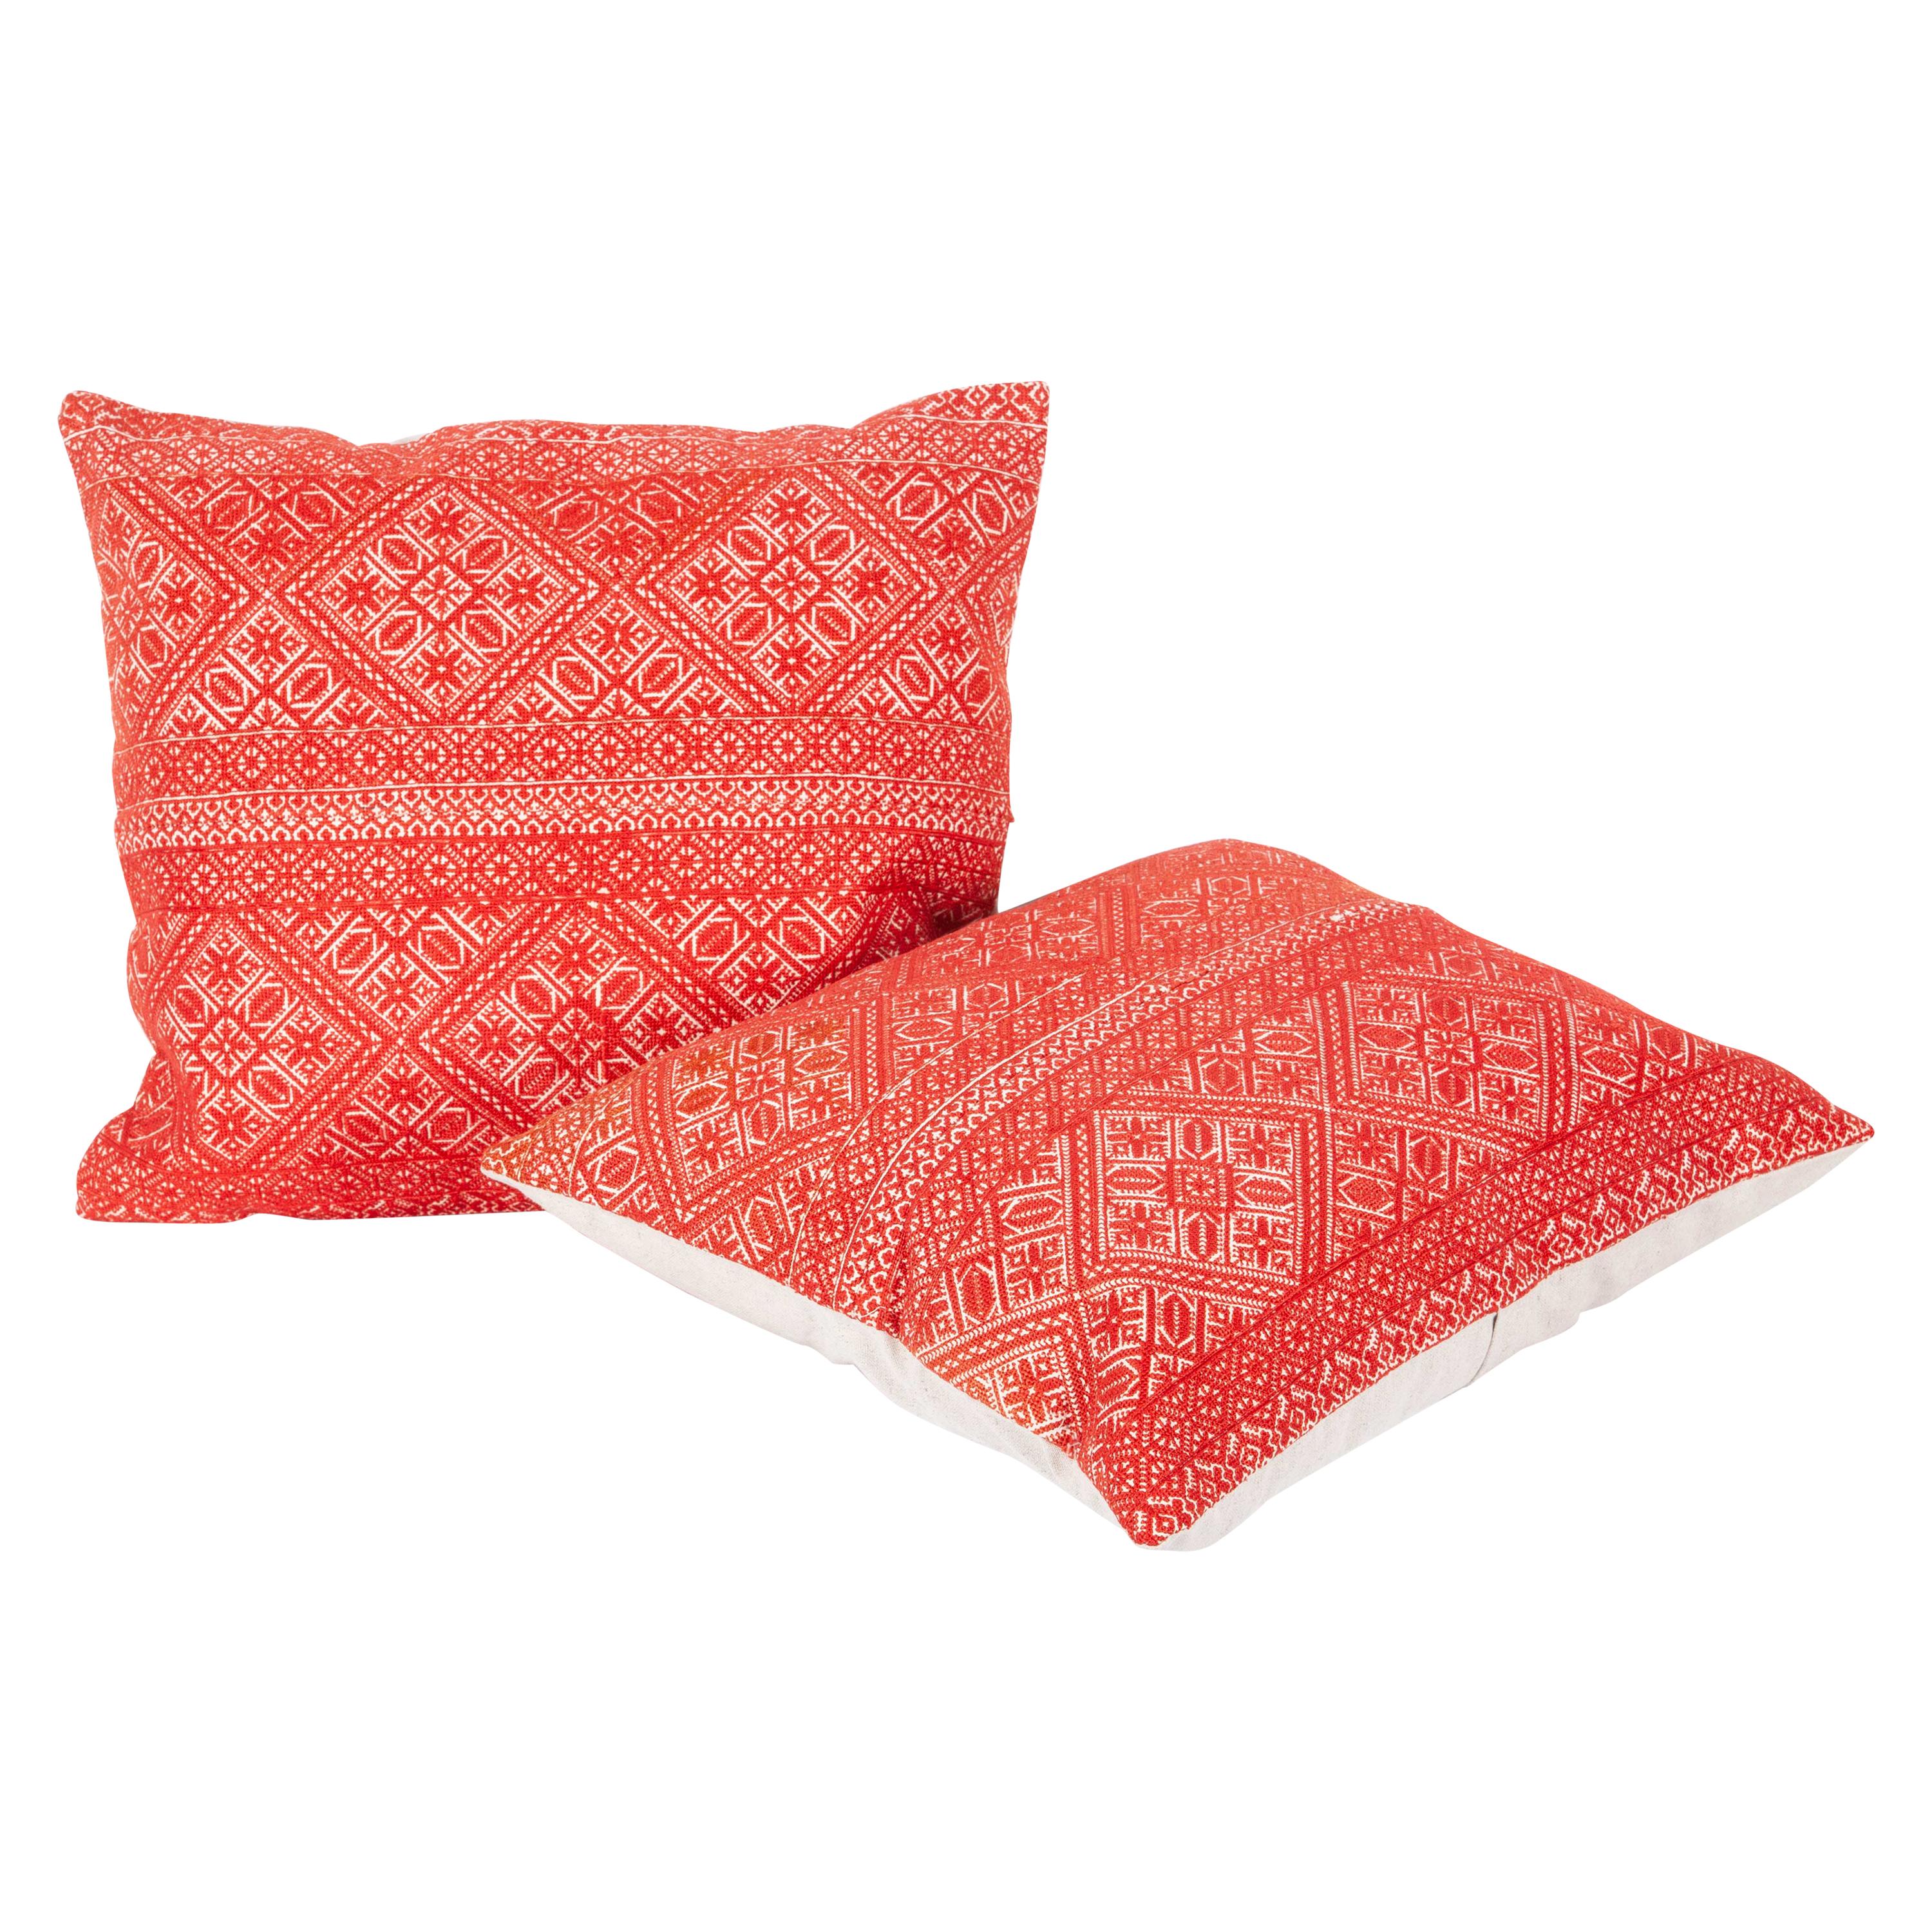 Pillow Case Made from an Early 20th Century Fez Embroidery from Morocco